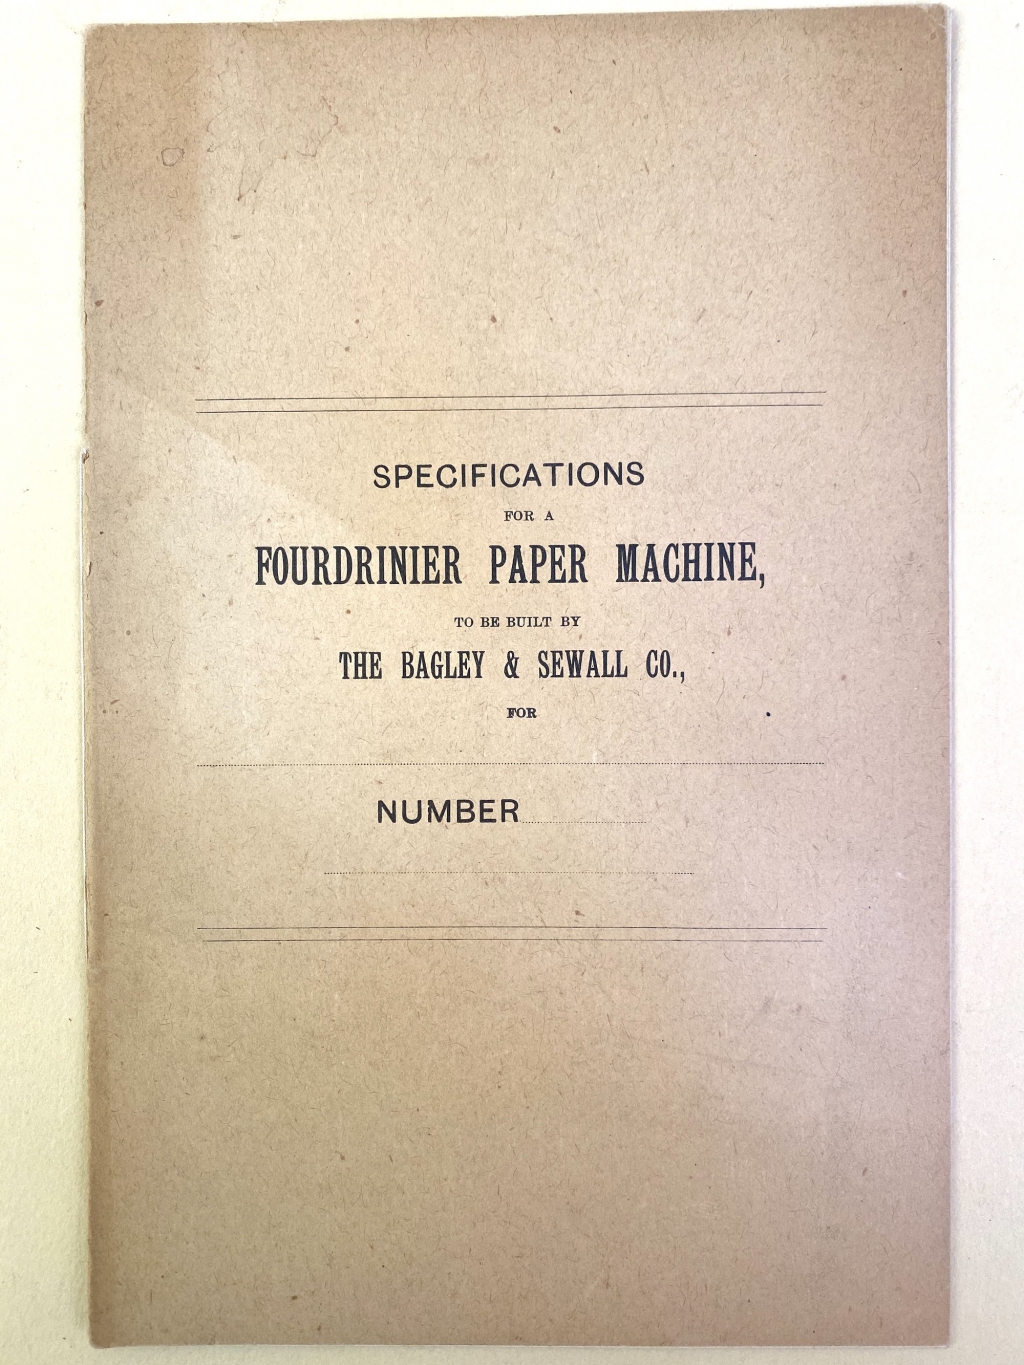 Cover of Bagley & Sewall Proposal for a Fourdrinier Machine.